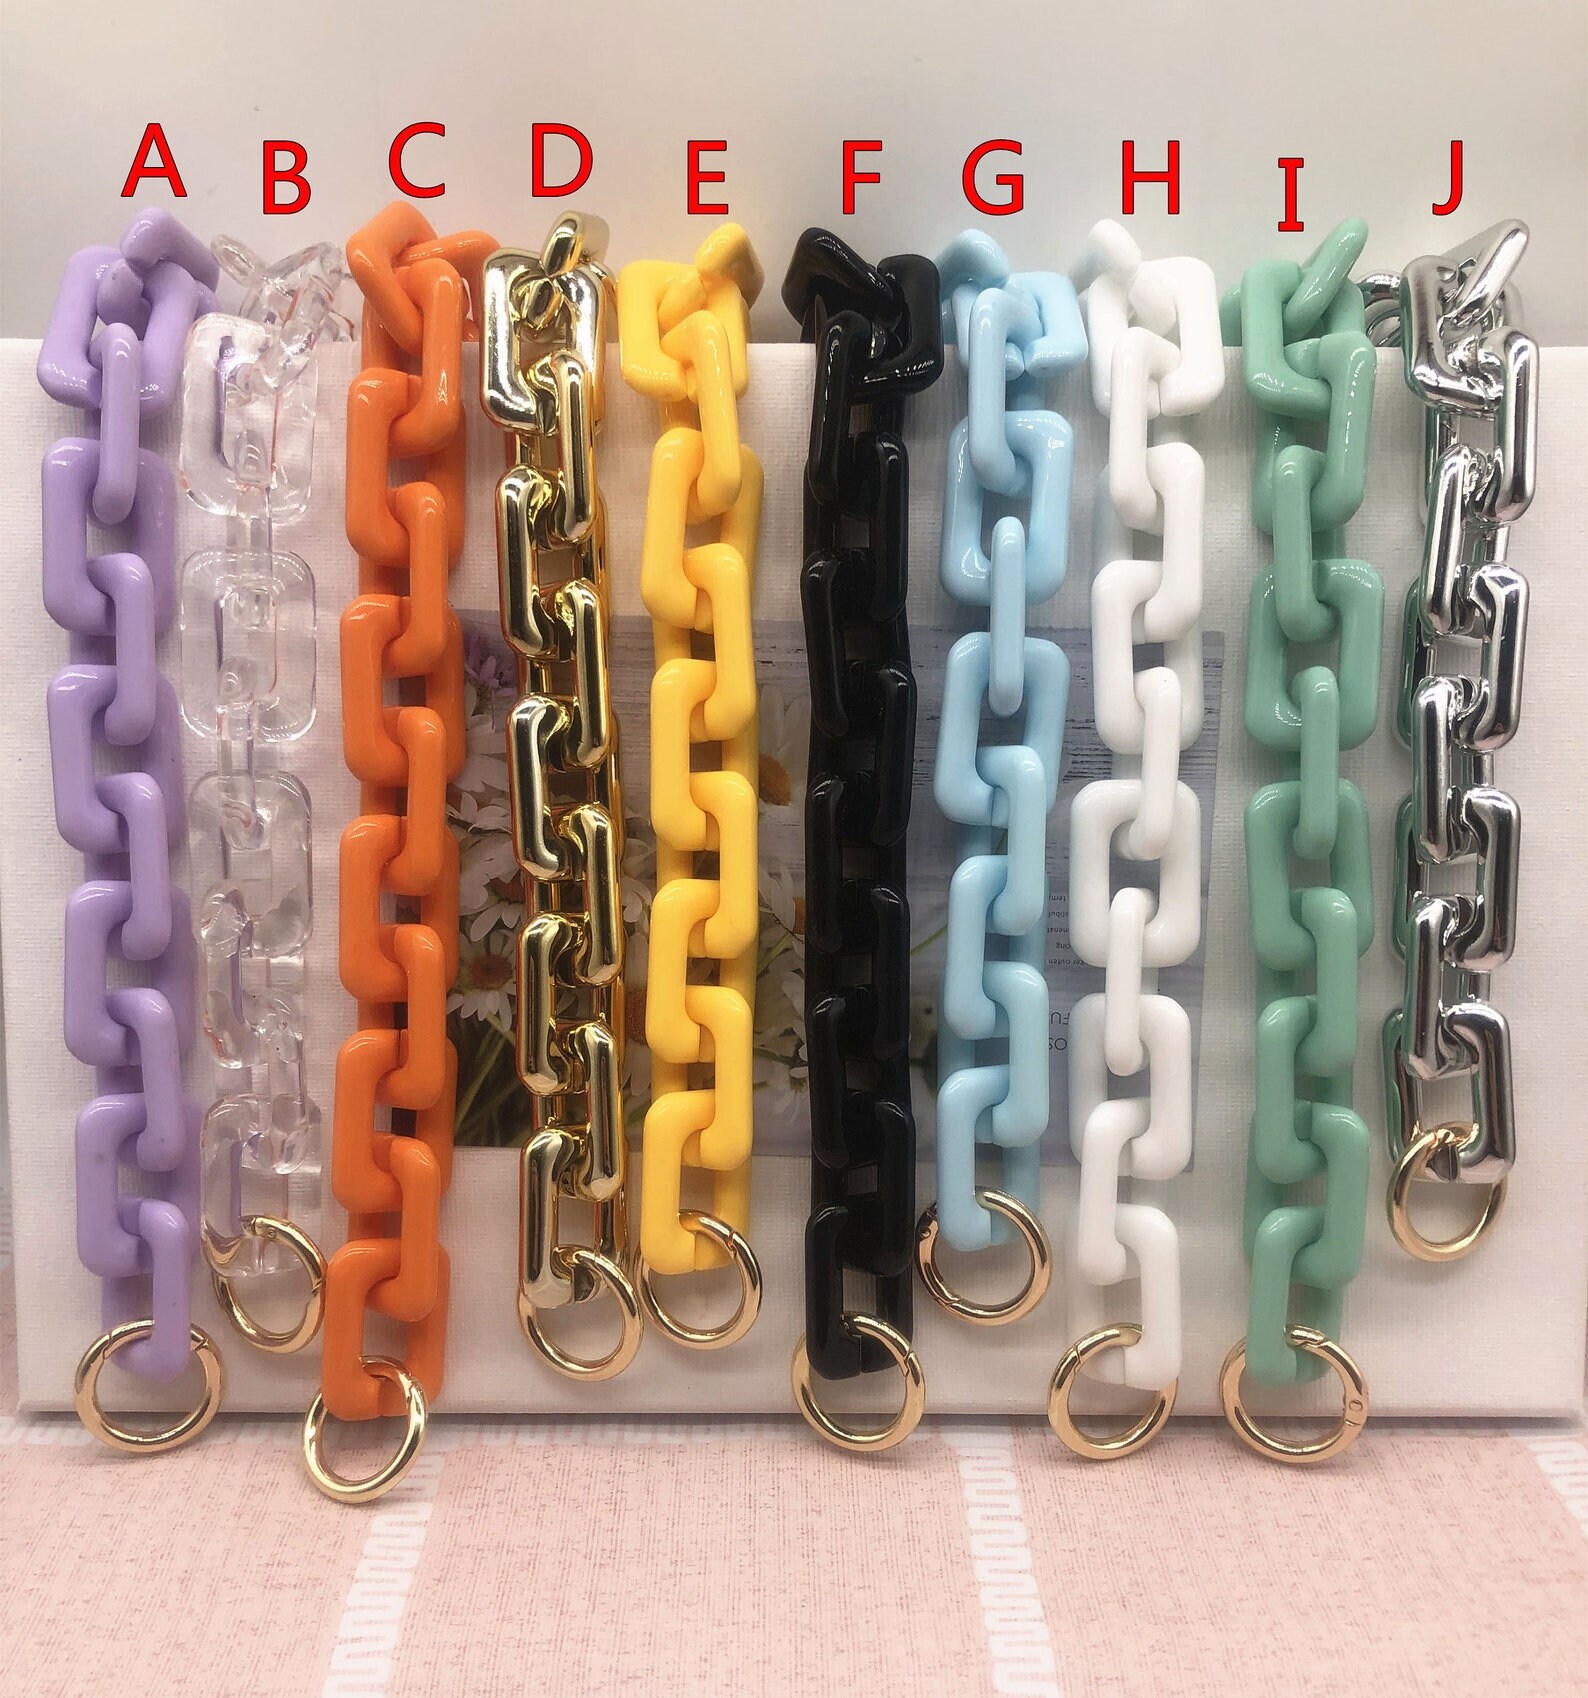 2.3cm 0.9 High Quality Chunky Acrylic Purse Chain, New Resin Hand Bag Strap,  Metal Shoulder Handbag Strap, Tote Wallet Handle Replacement 